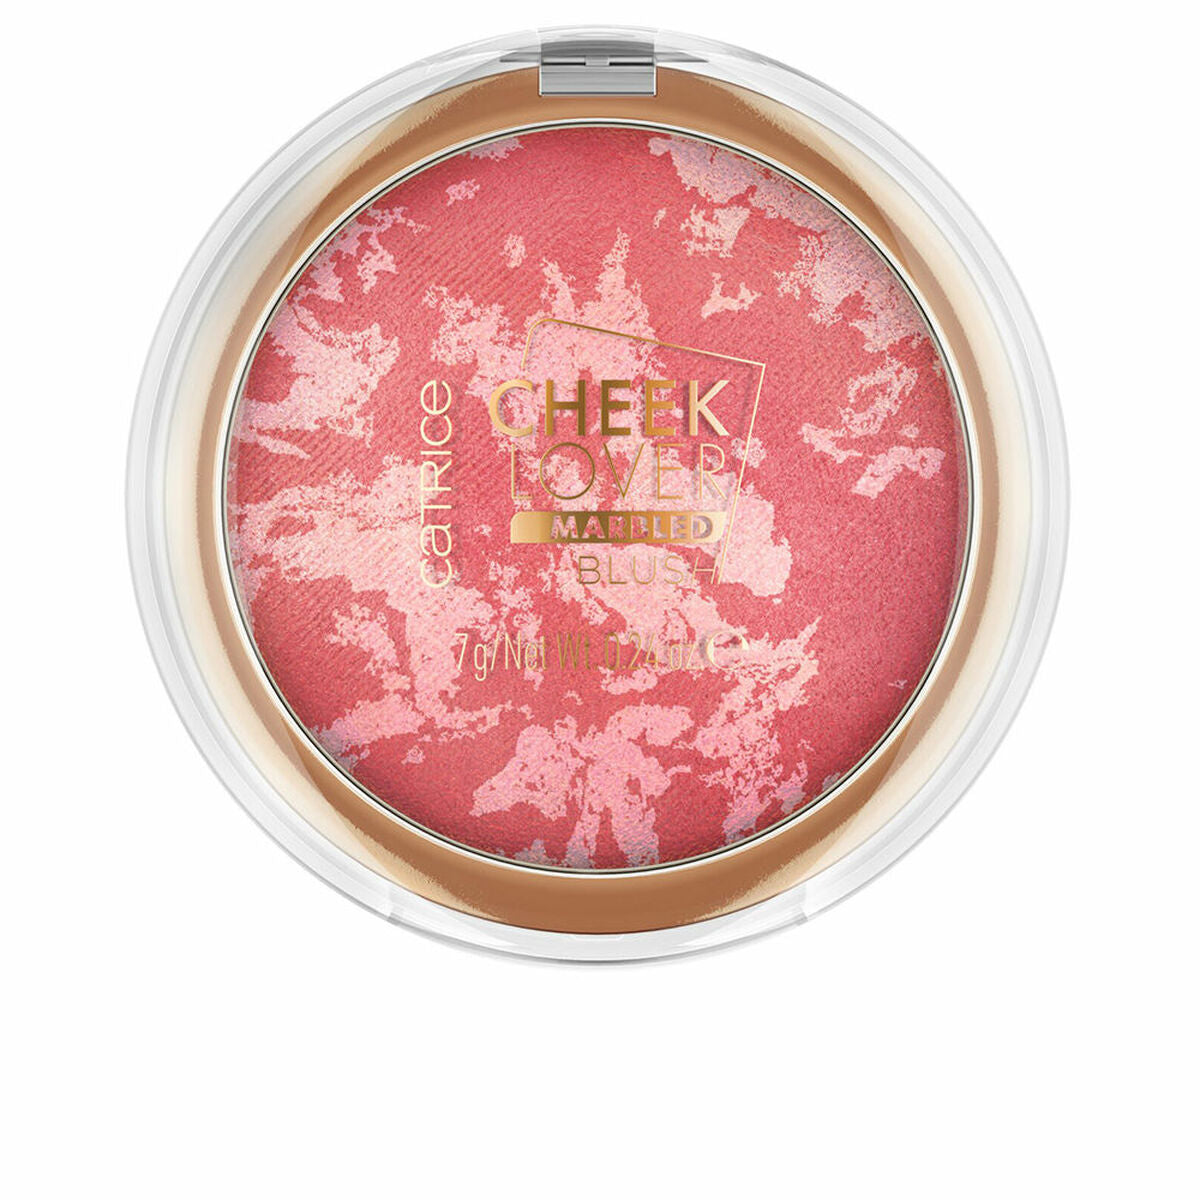 Blush Catrice Cheek Lover Marbled Nº 010 7 g | Catrice | Aylal Beauty